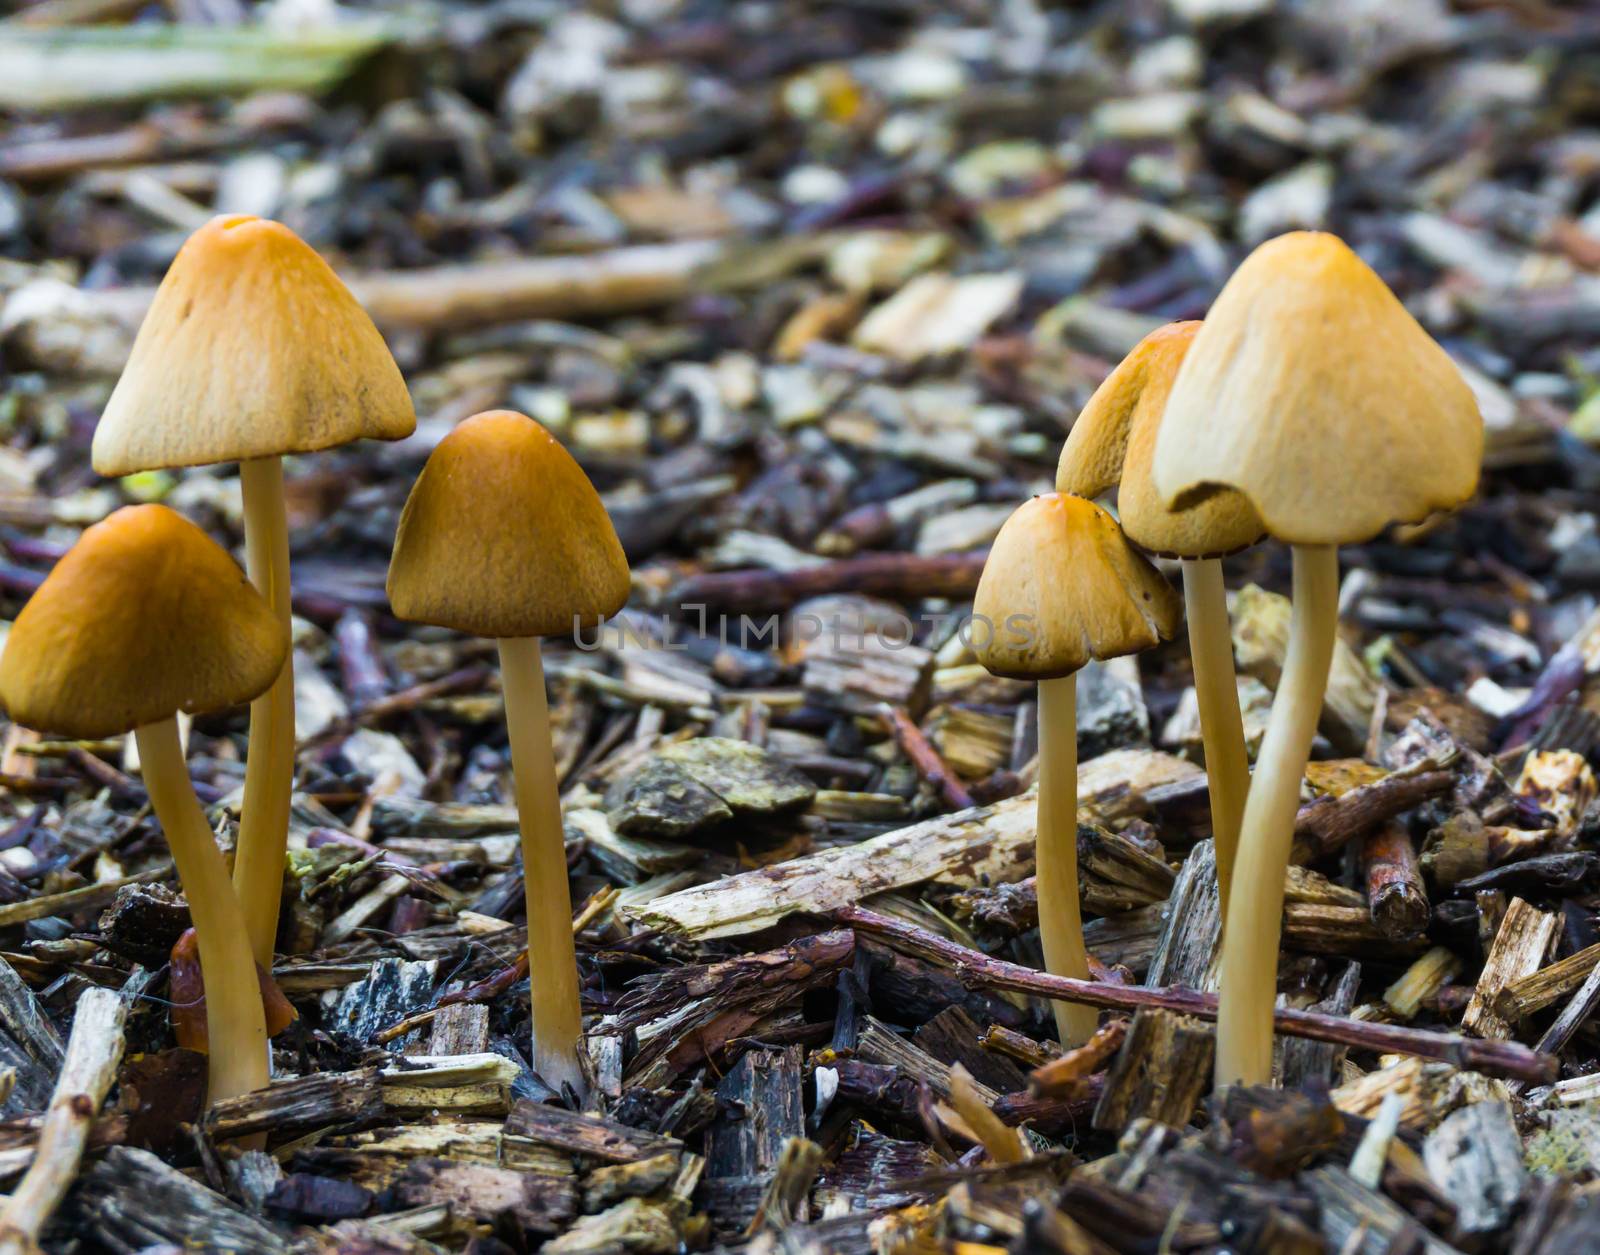 bunch of white dunce cap mushrooms with bell shaped caps growing in some wood chips natural forest autumn background by charlottebleijenberg